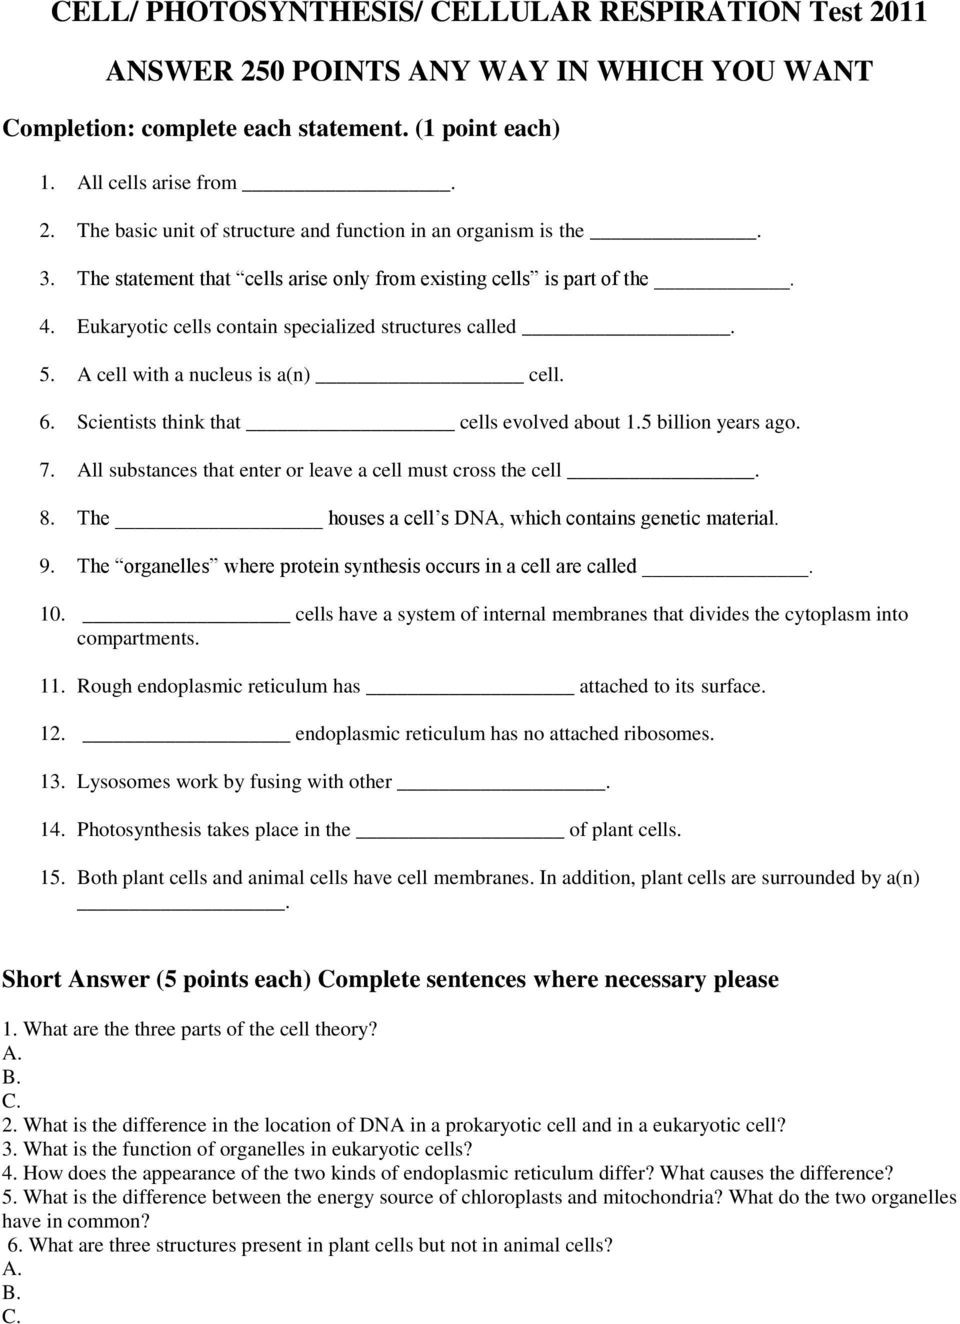 Photosynthesis Worksheet Answer Key Cell Photosynthesis Cellular Respiration Test 2011 Answer